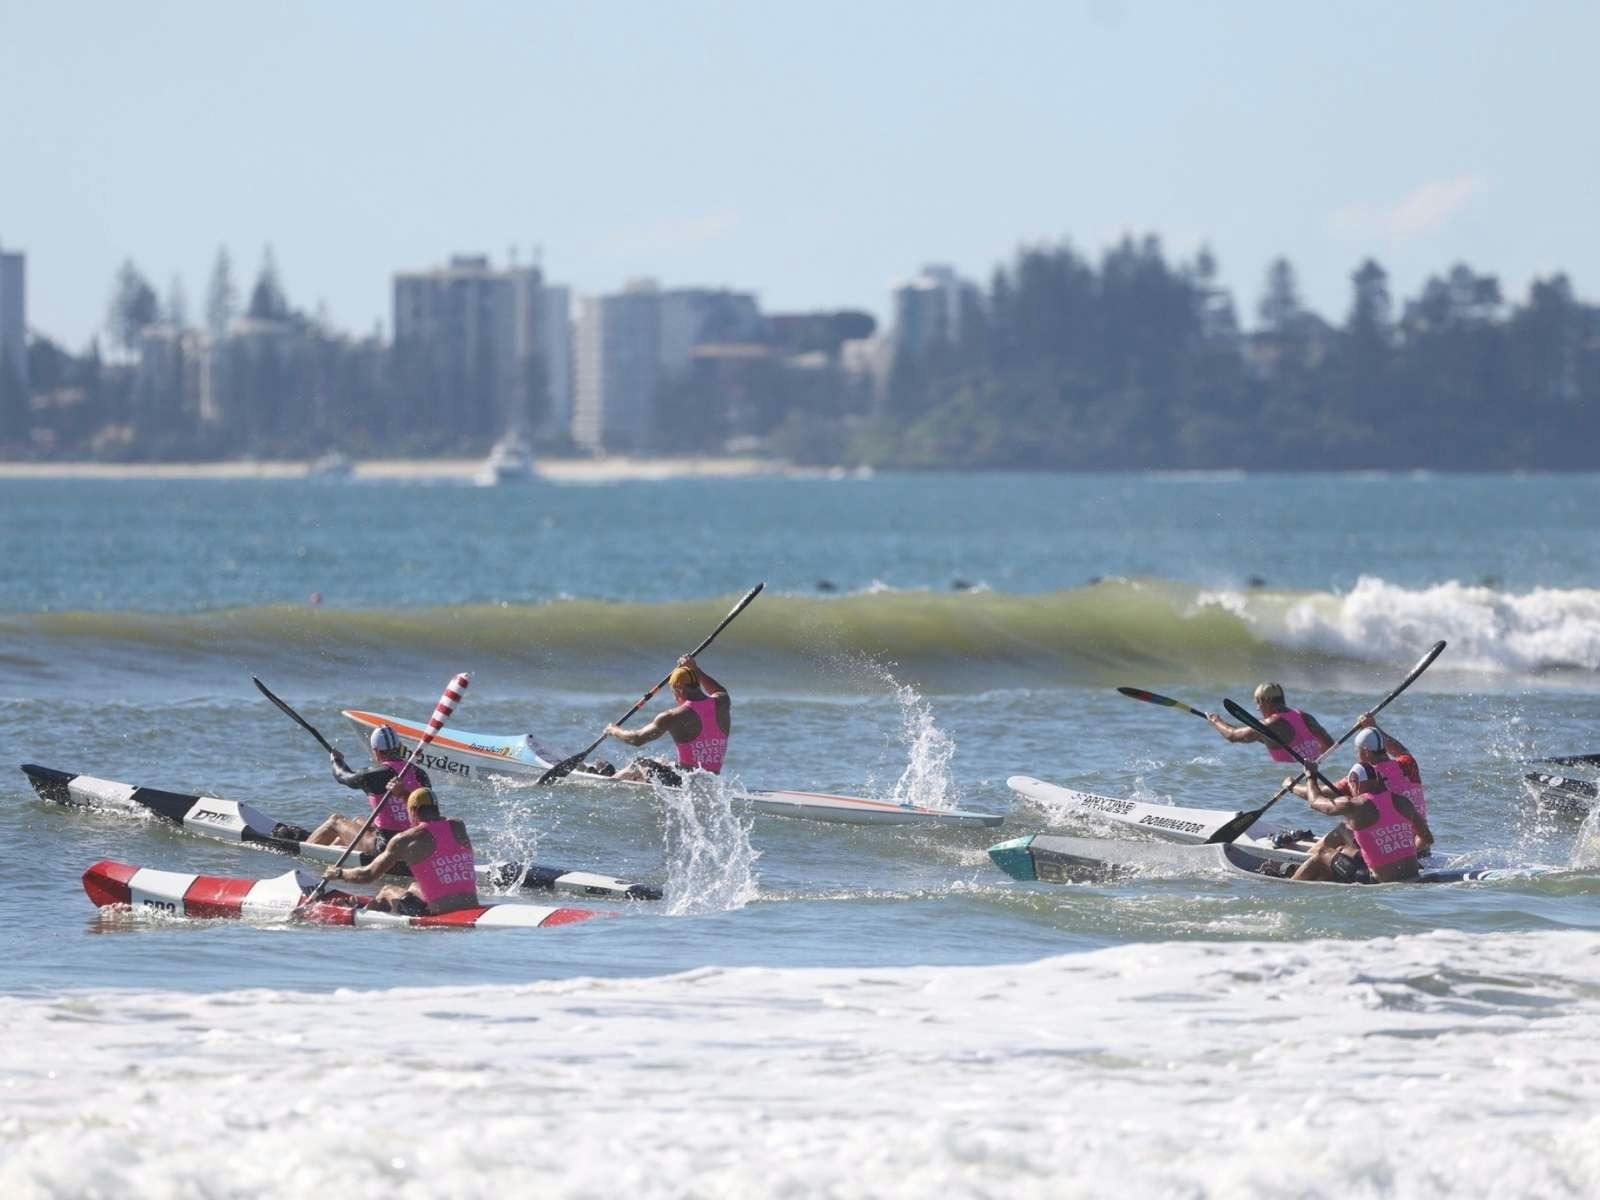 Ocean Ski Paddling Competition Event